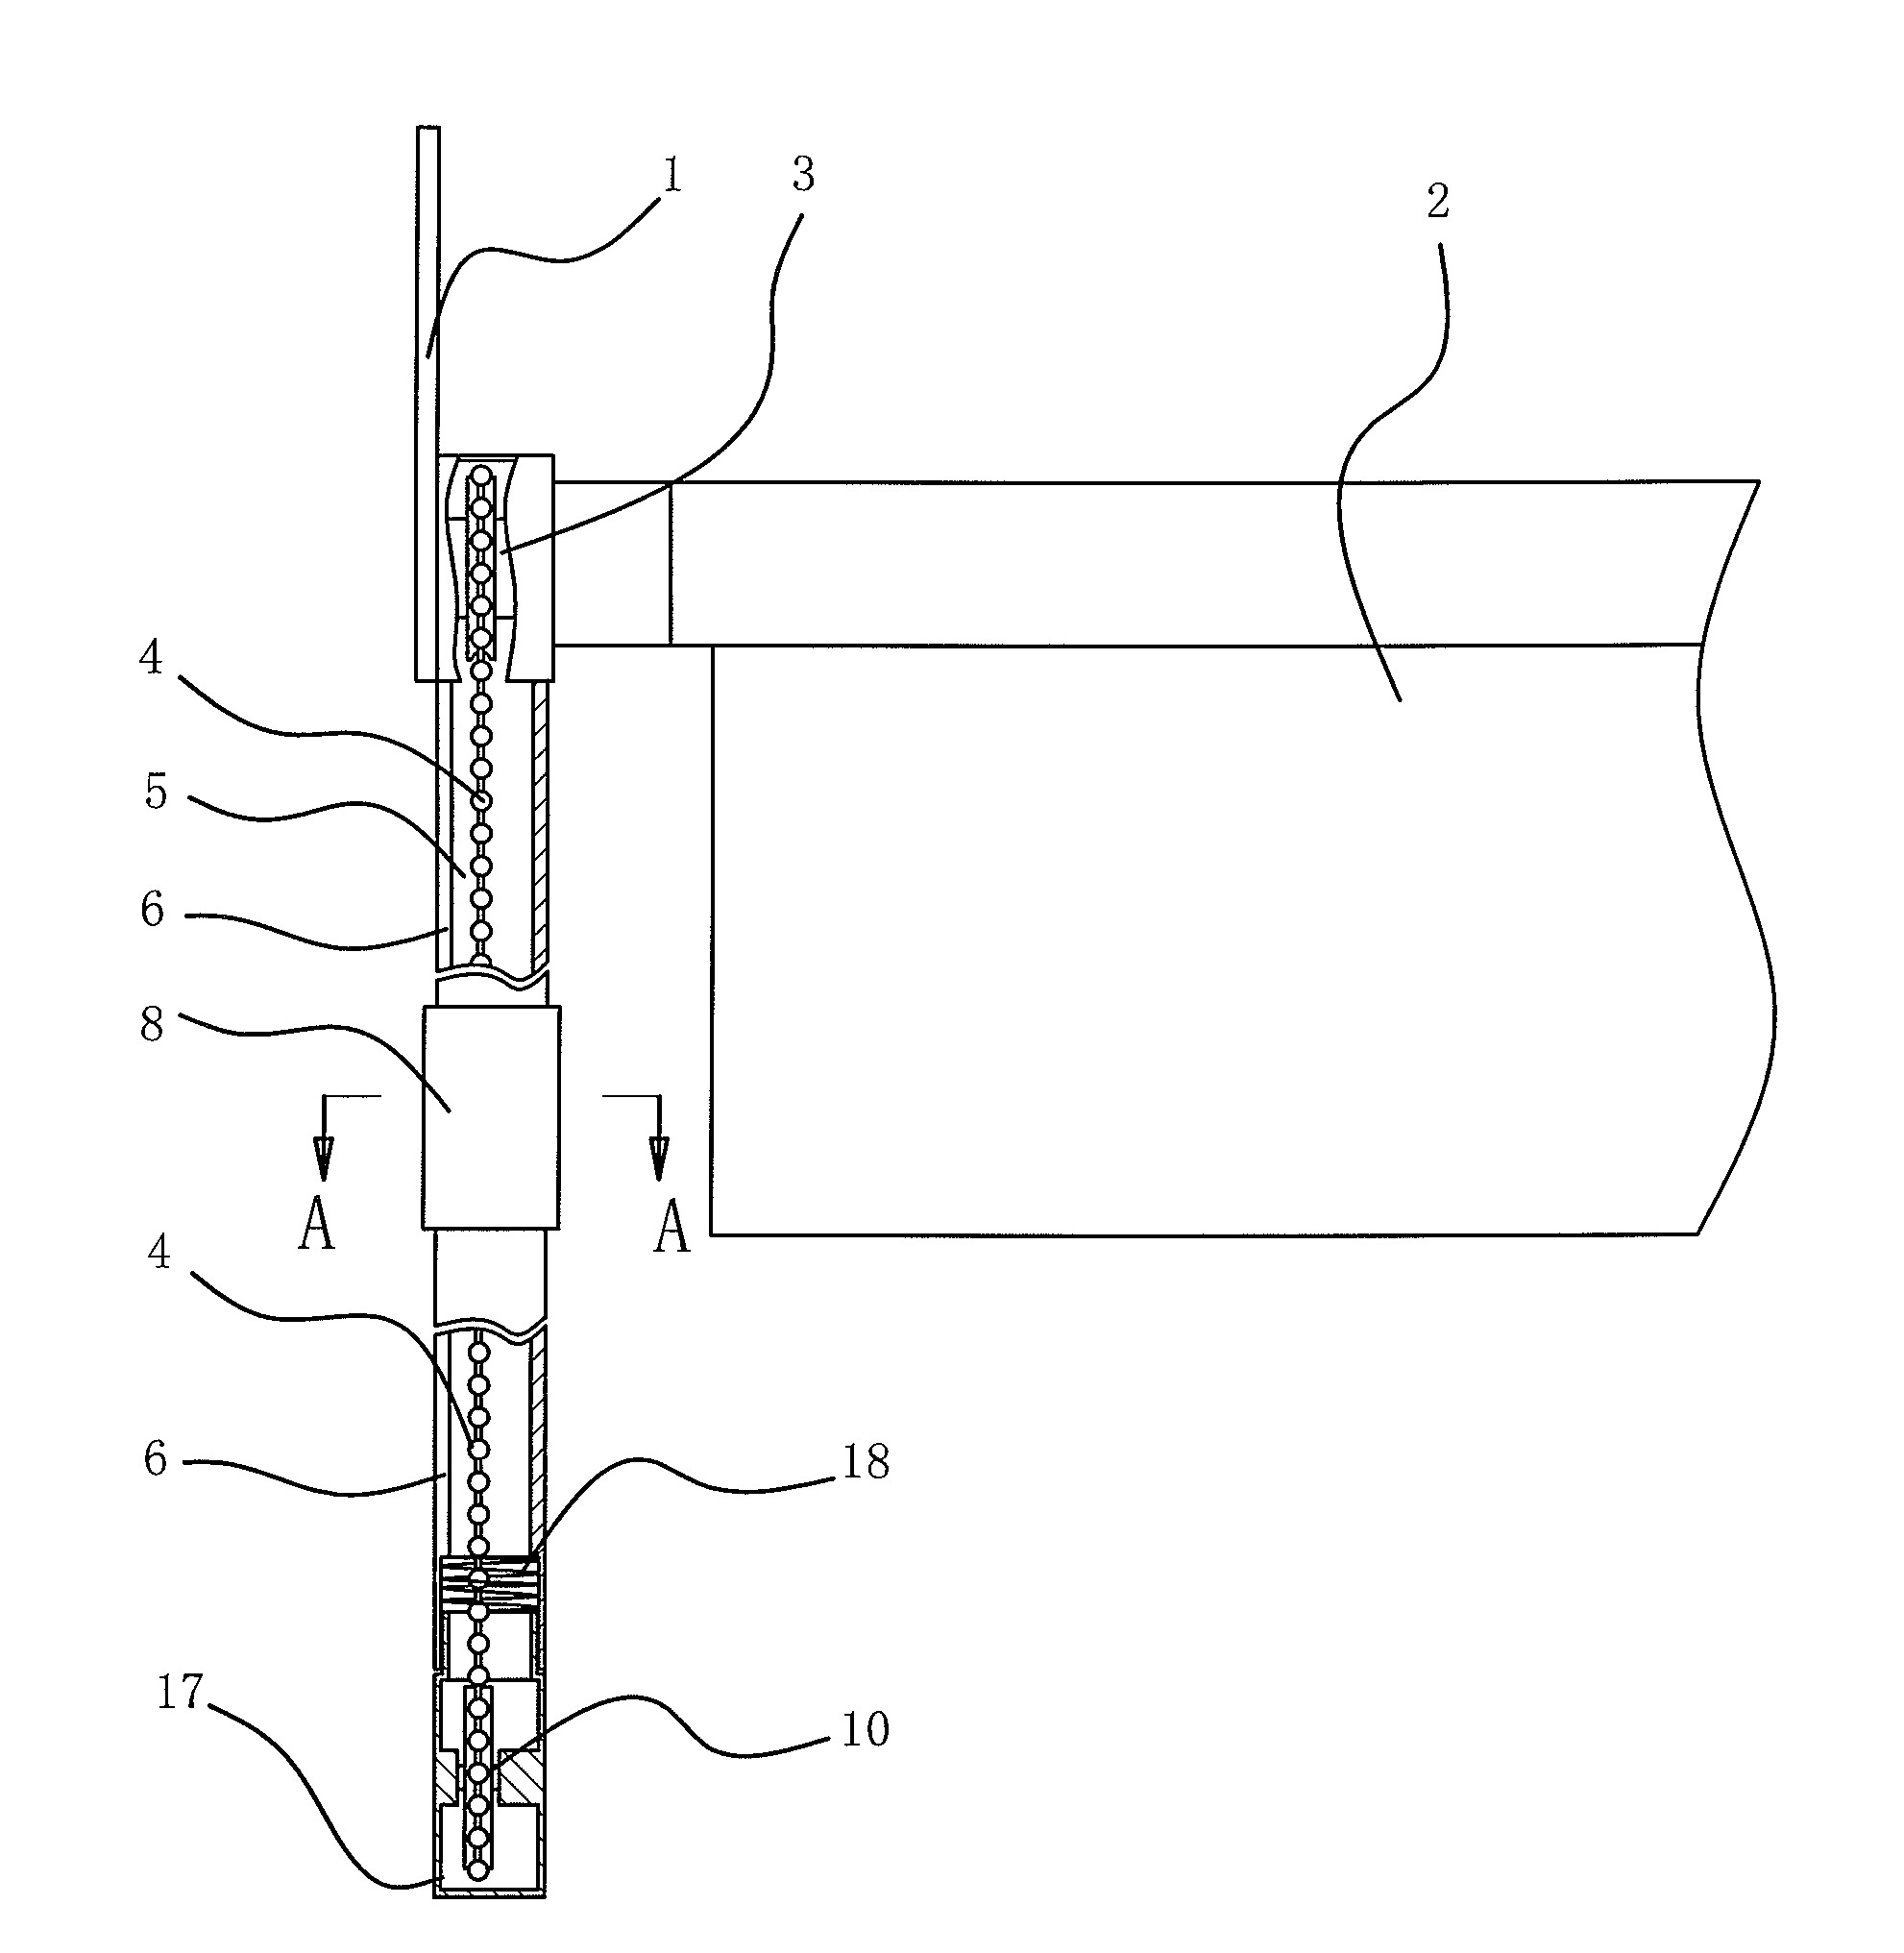 Bidirectionally Operable/Switchable Pull Cord Mechanism for a Window Shade